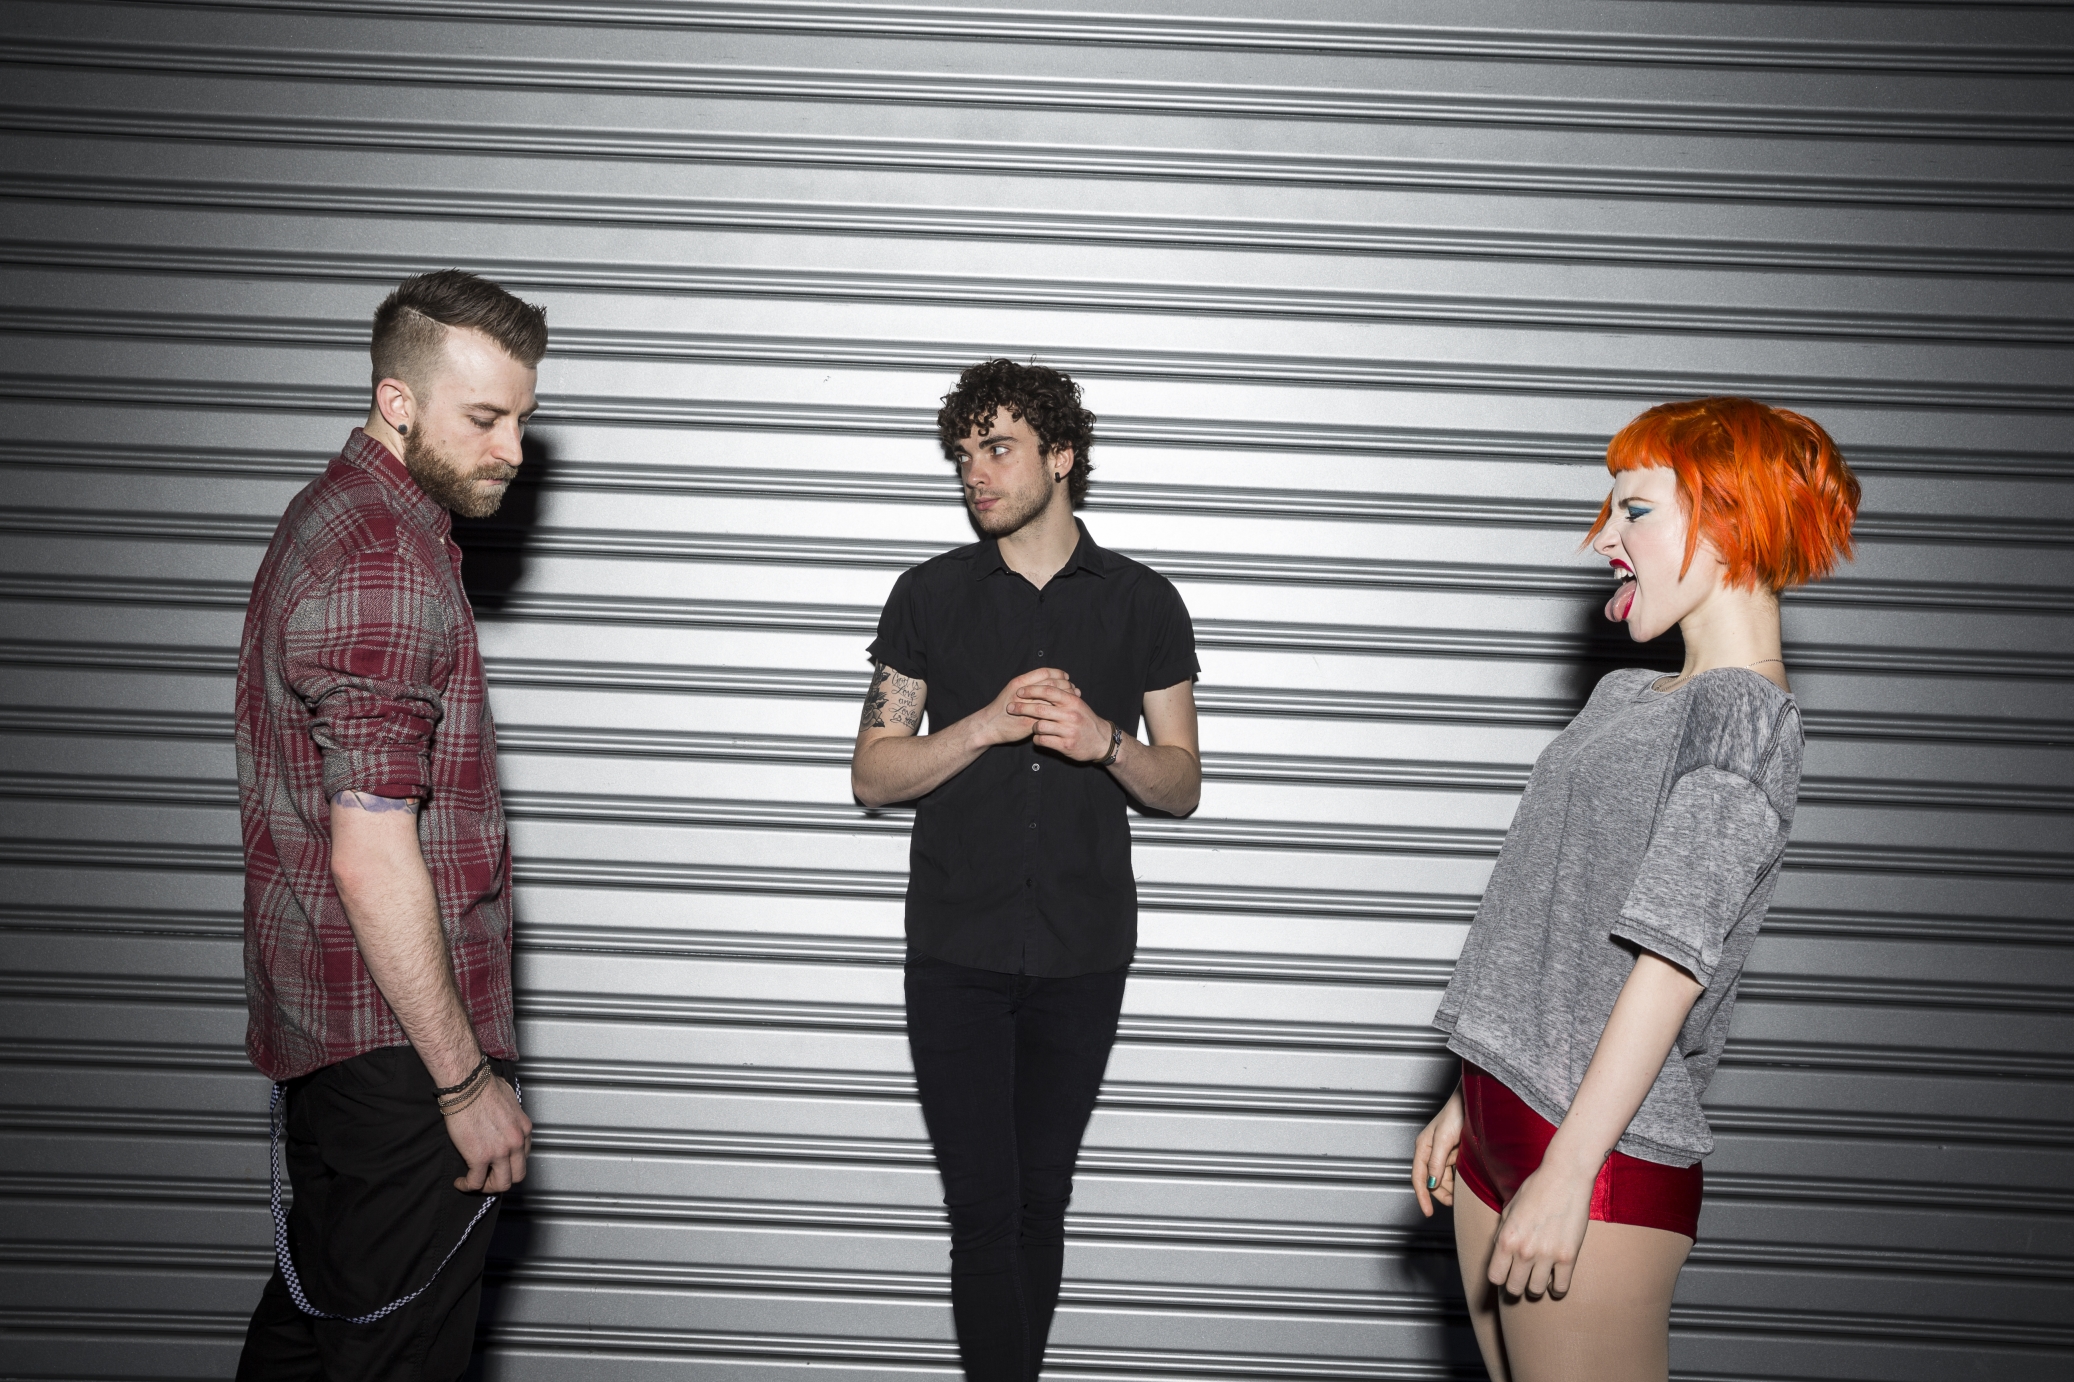 Paramore change cover art for self-titled 2013 album